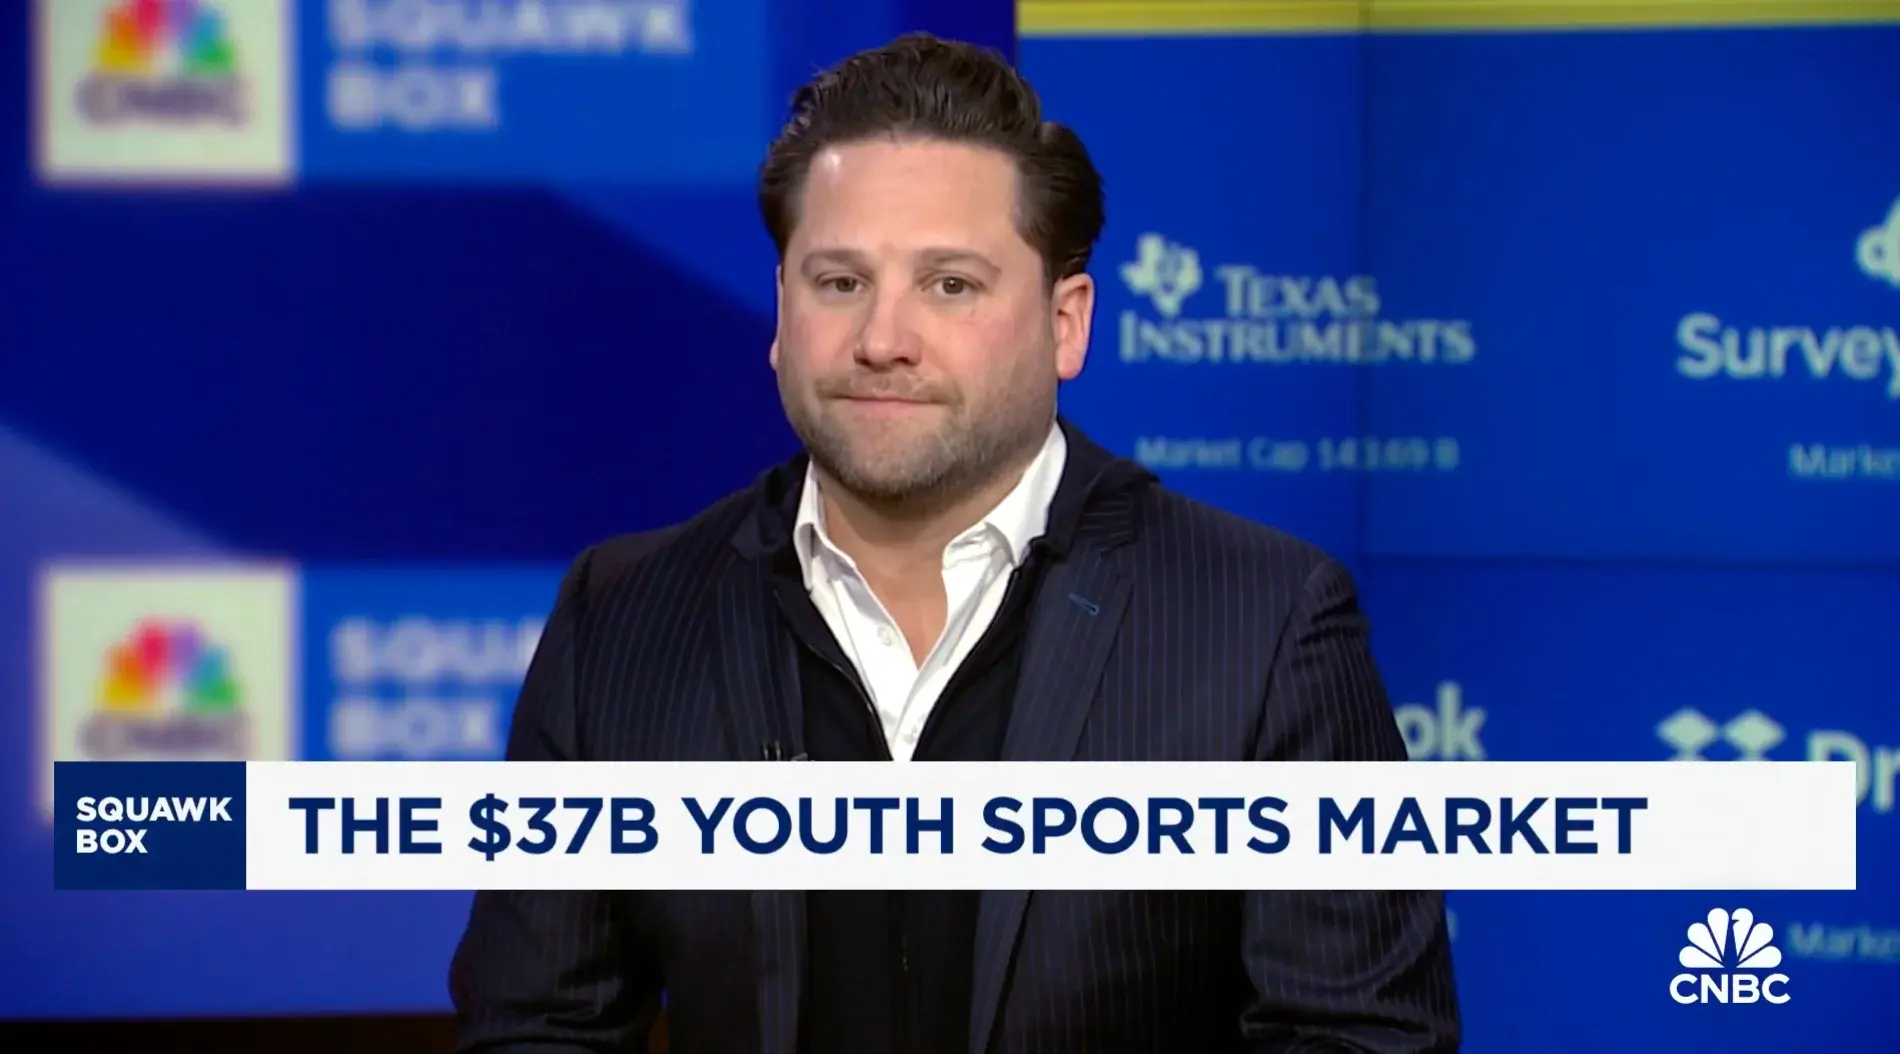 Featured image: CEO Peter Frintzilas and MOJO Sports CEO Ben Sherwood join CNBC’s Squawk Box to discuss the recent acquisition